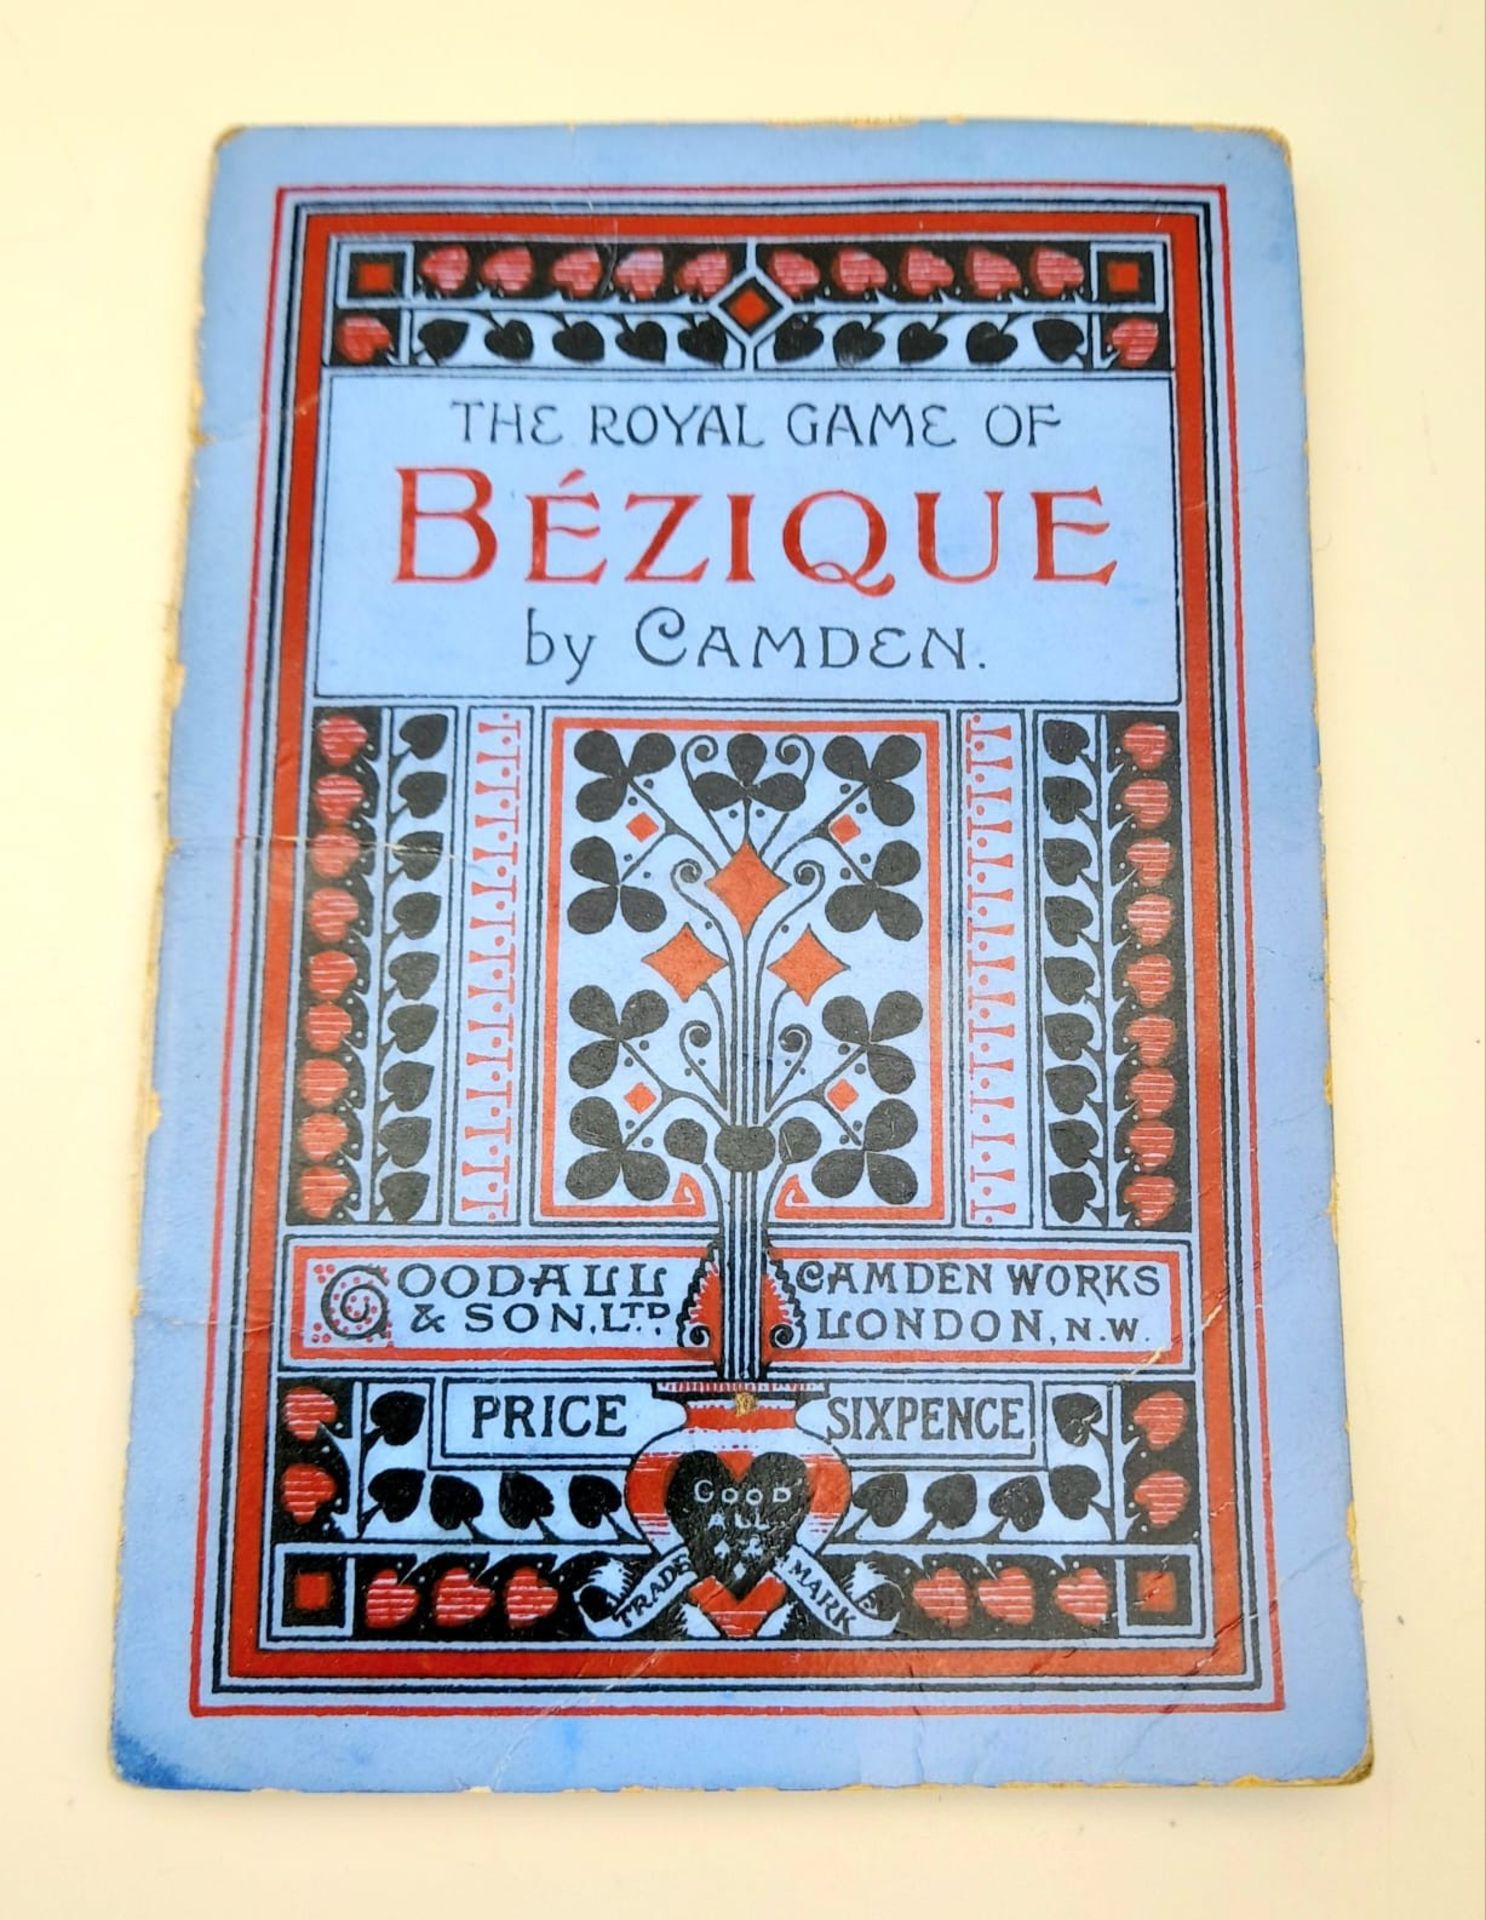 The Royal Game of Bezique Vintage Card Game. In good condition, in original packaging. - Image 2 of 5